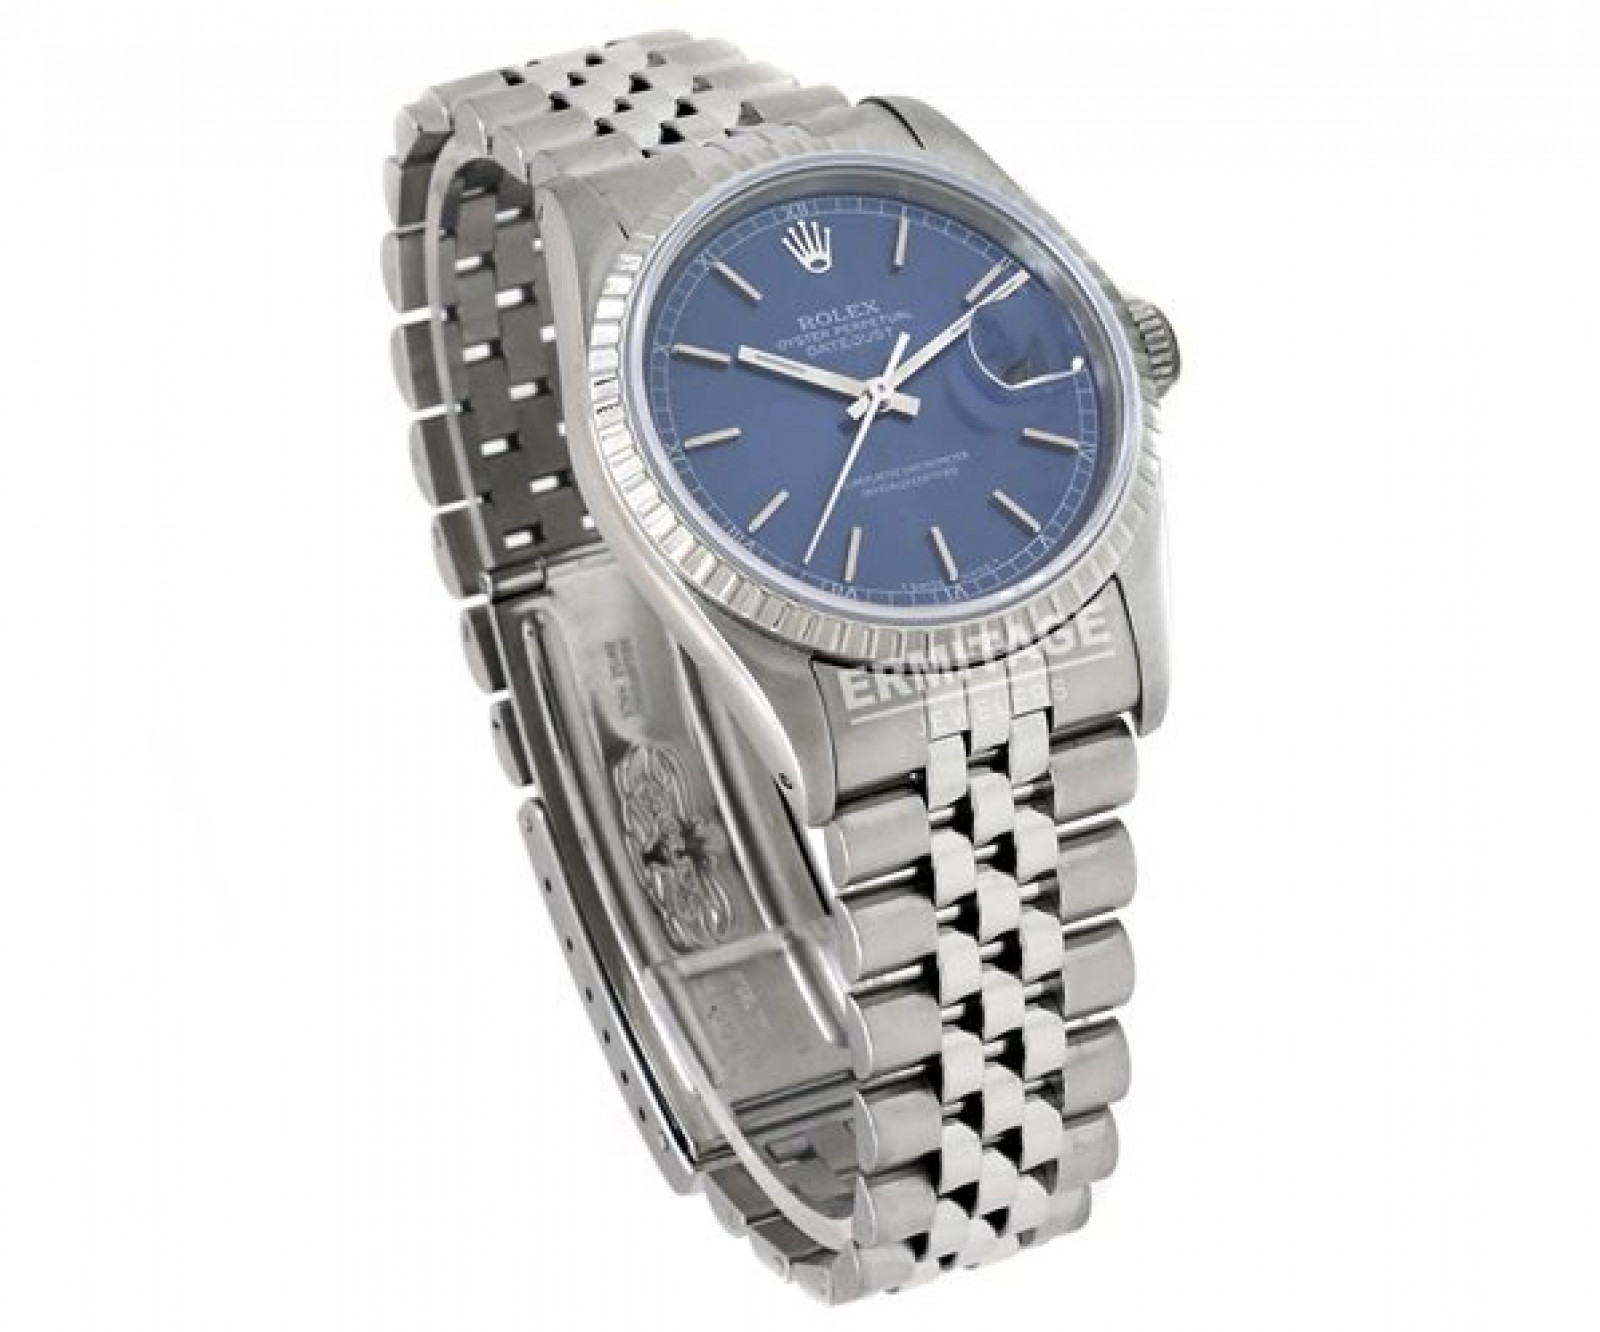 Rolex Datejust 16220 Steel with Blue Dial